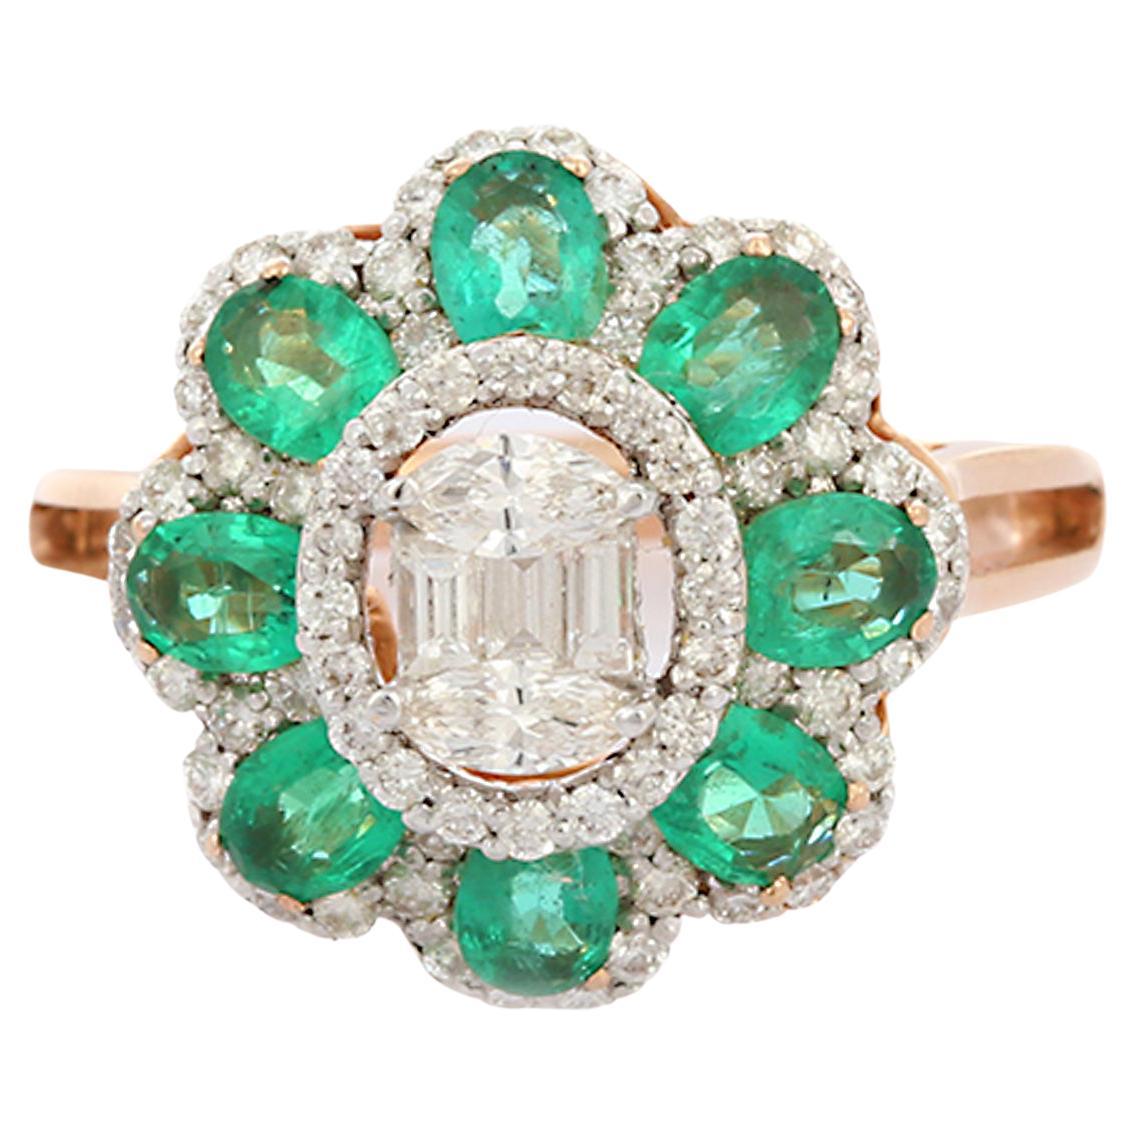 Glamorous Solid 18K Rose Gold Diamond and Emerald Cocktail Ring 